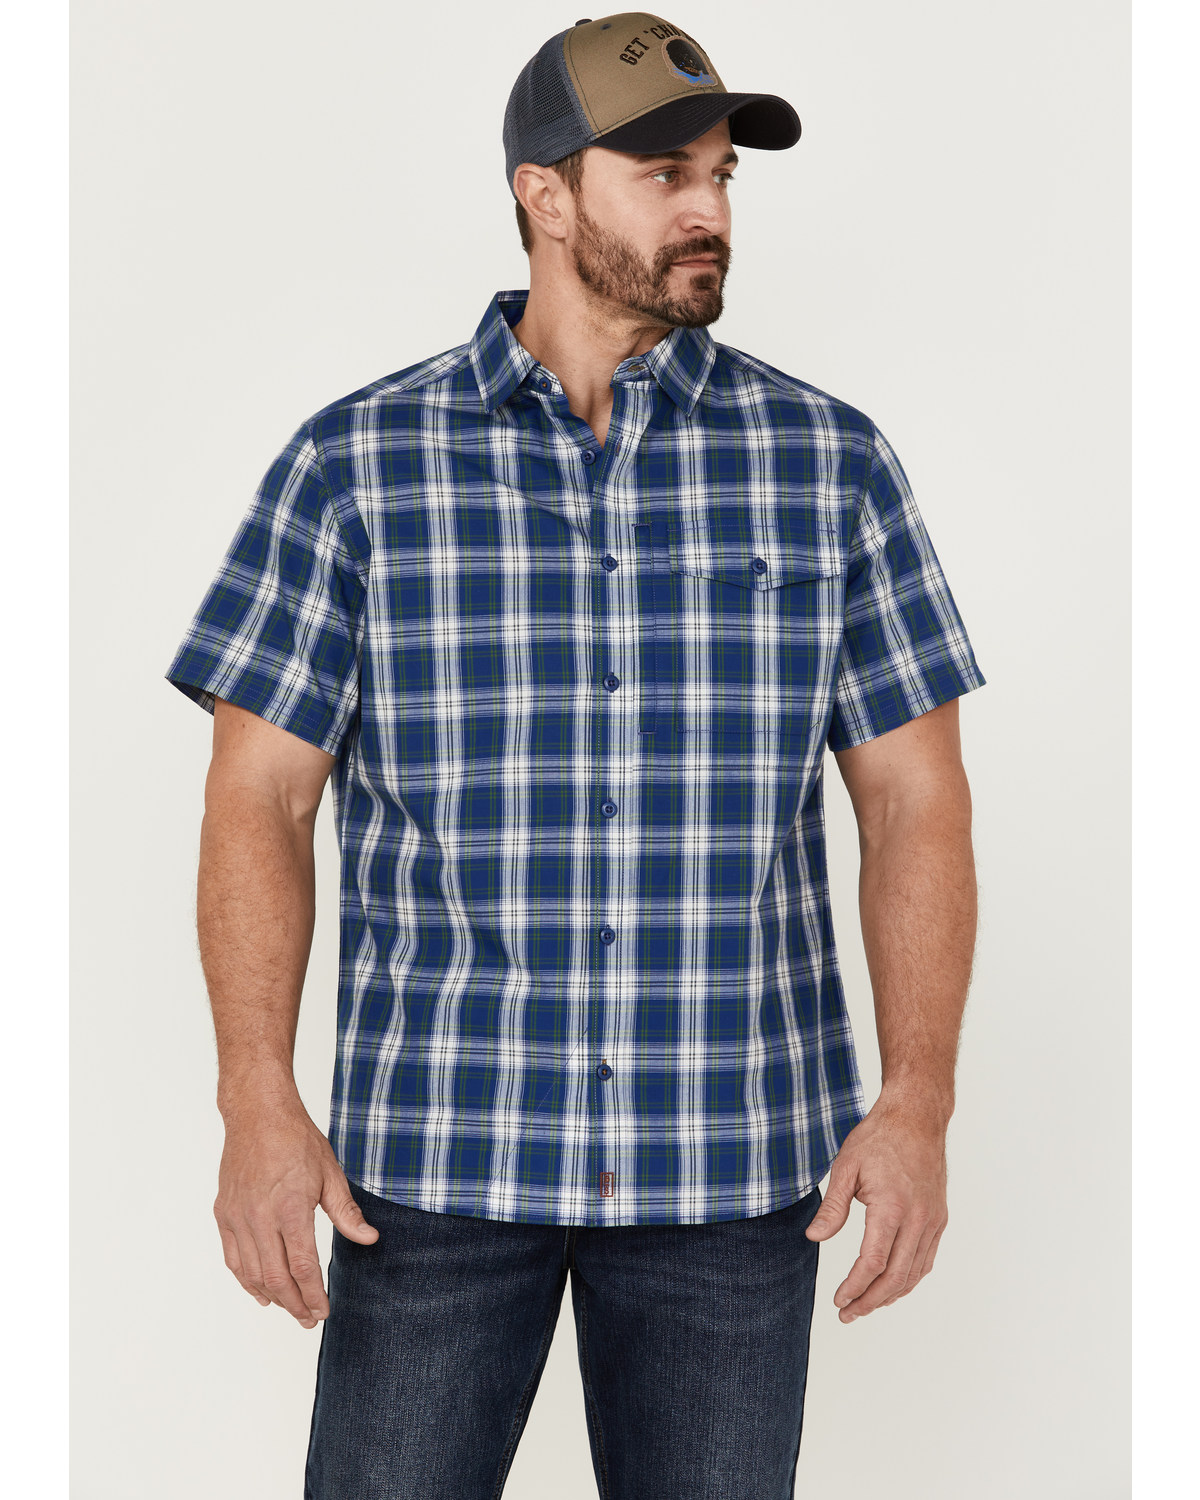 Brothers and Sons Men's Performance Plaid Short Sleeve Button Down Western Shirt